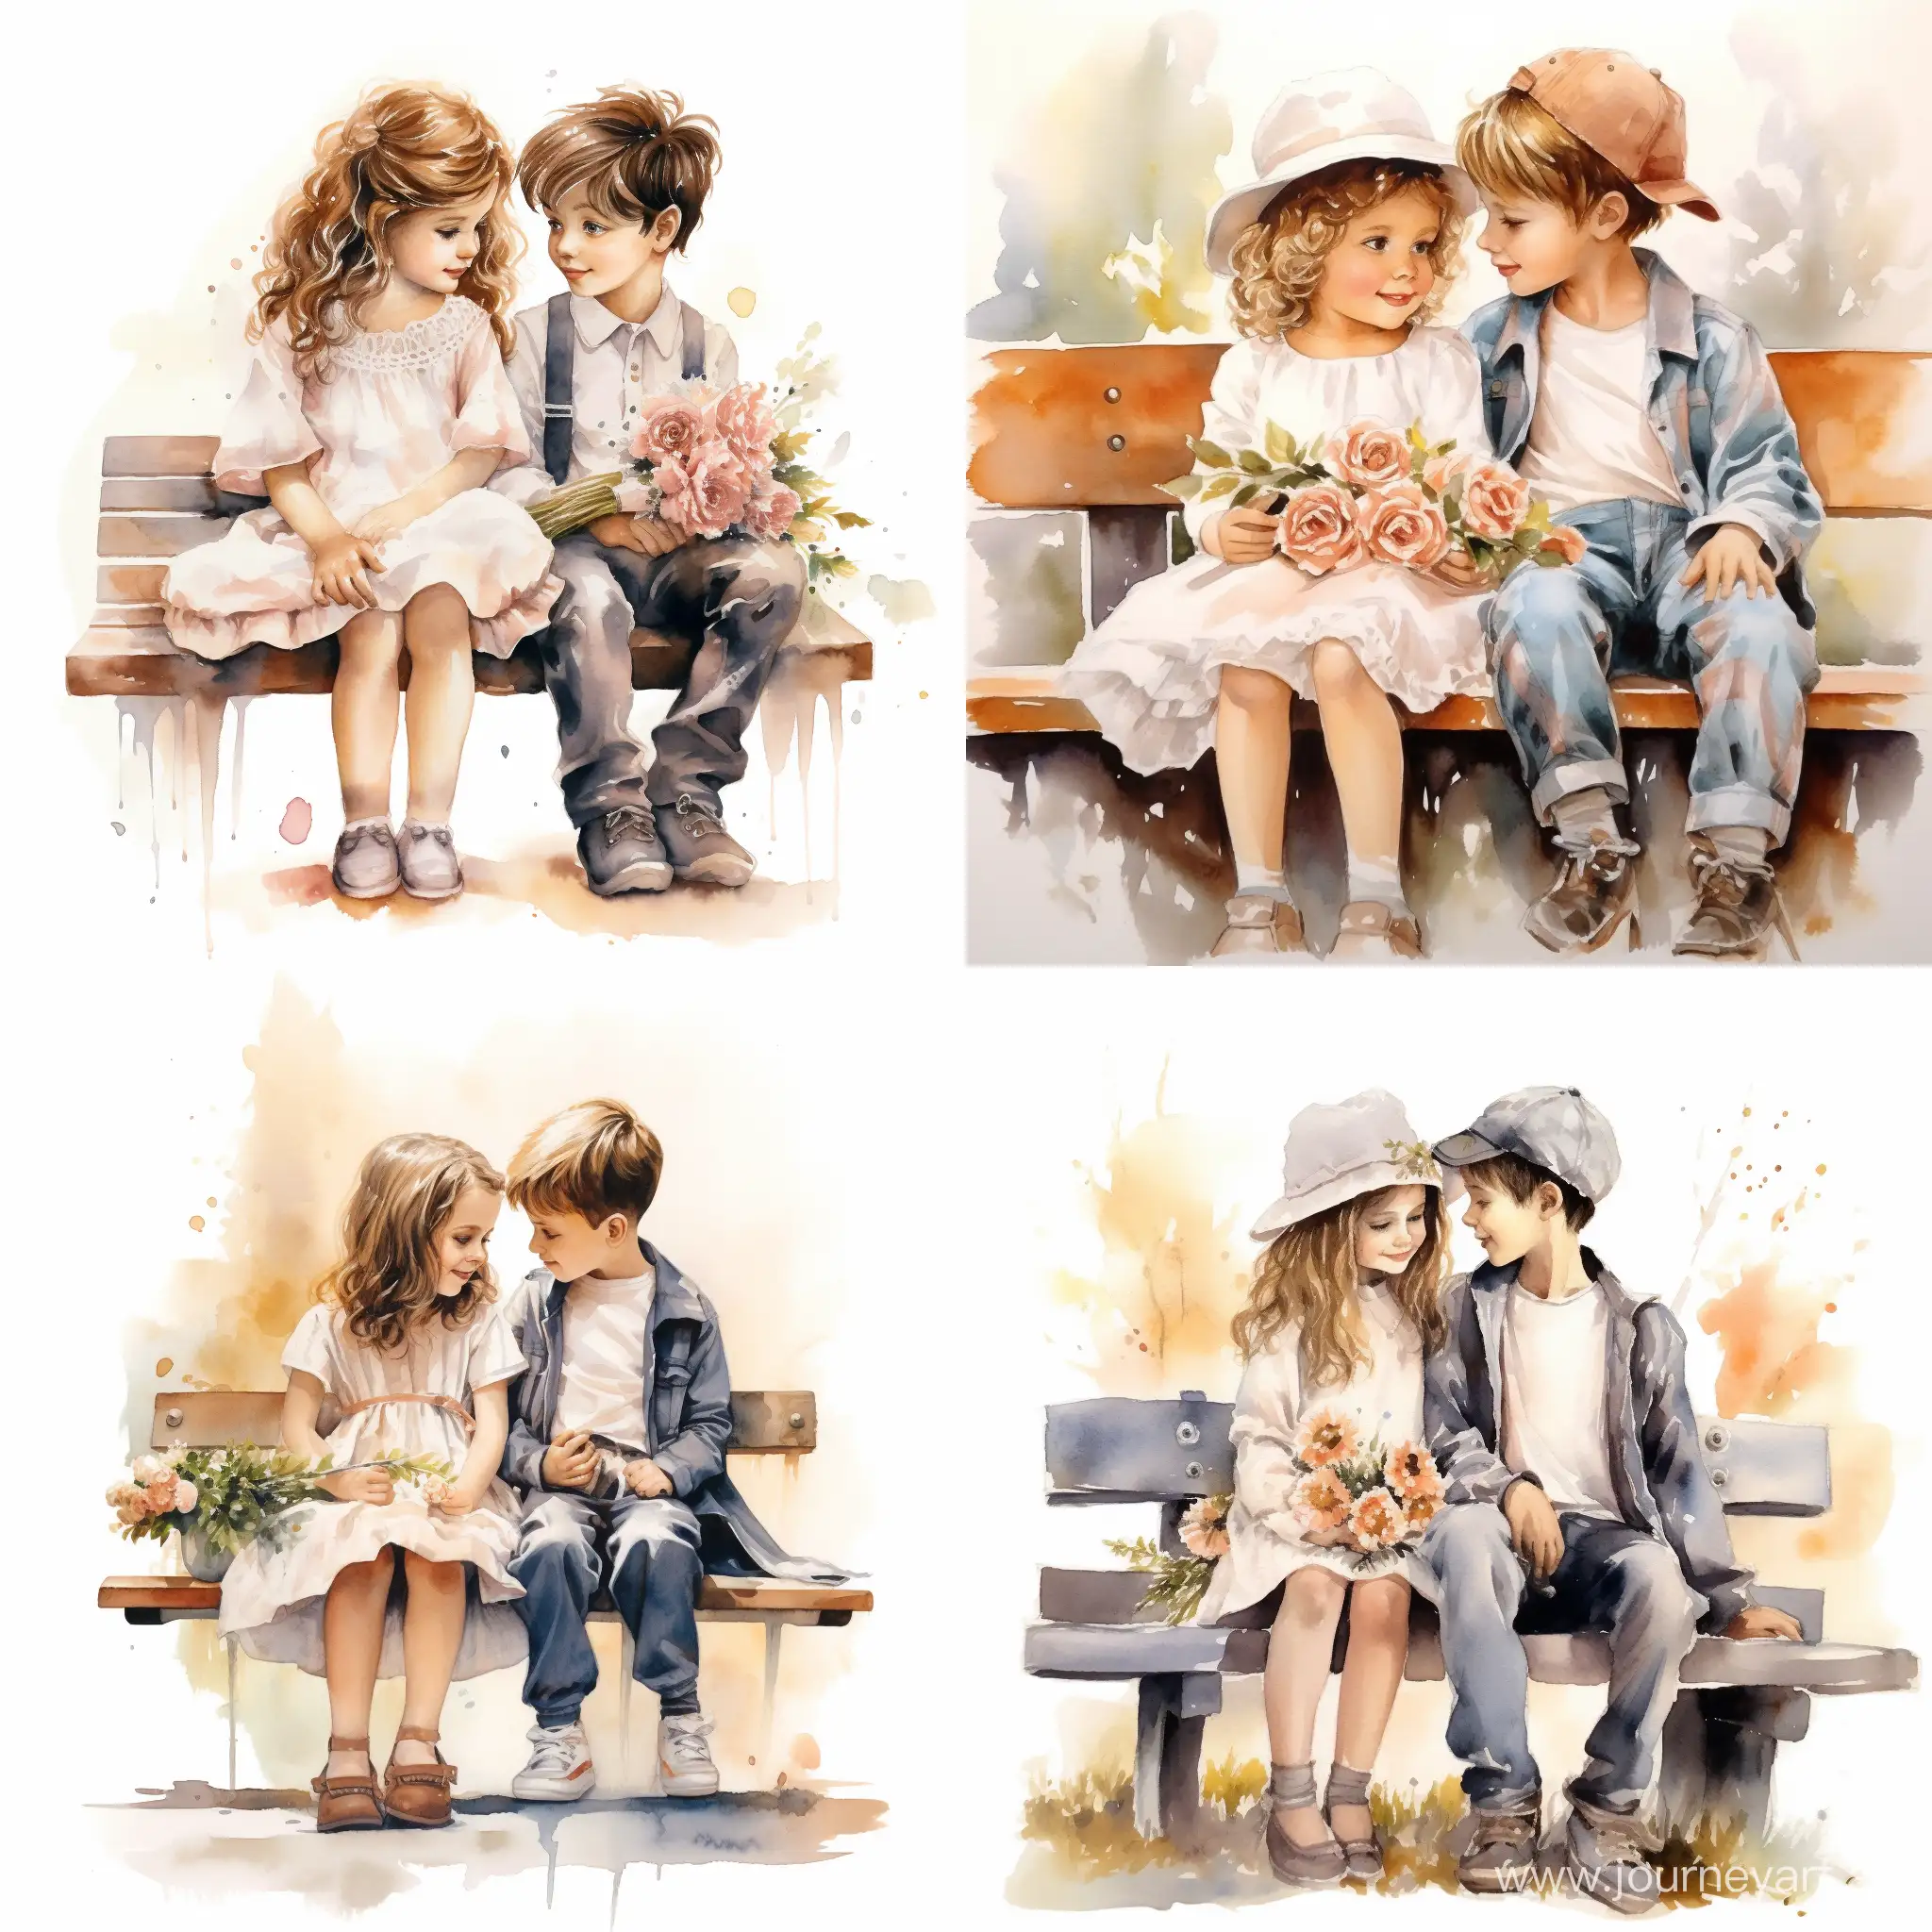 Romantic-Childrens-Photography-Sweet-Gesture-on-a-Bench-with-Flowers